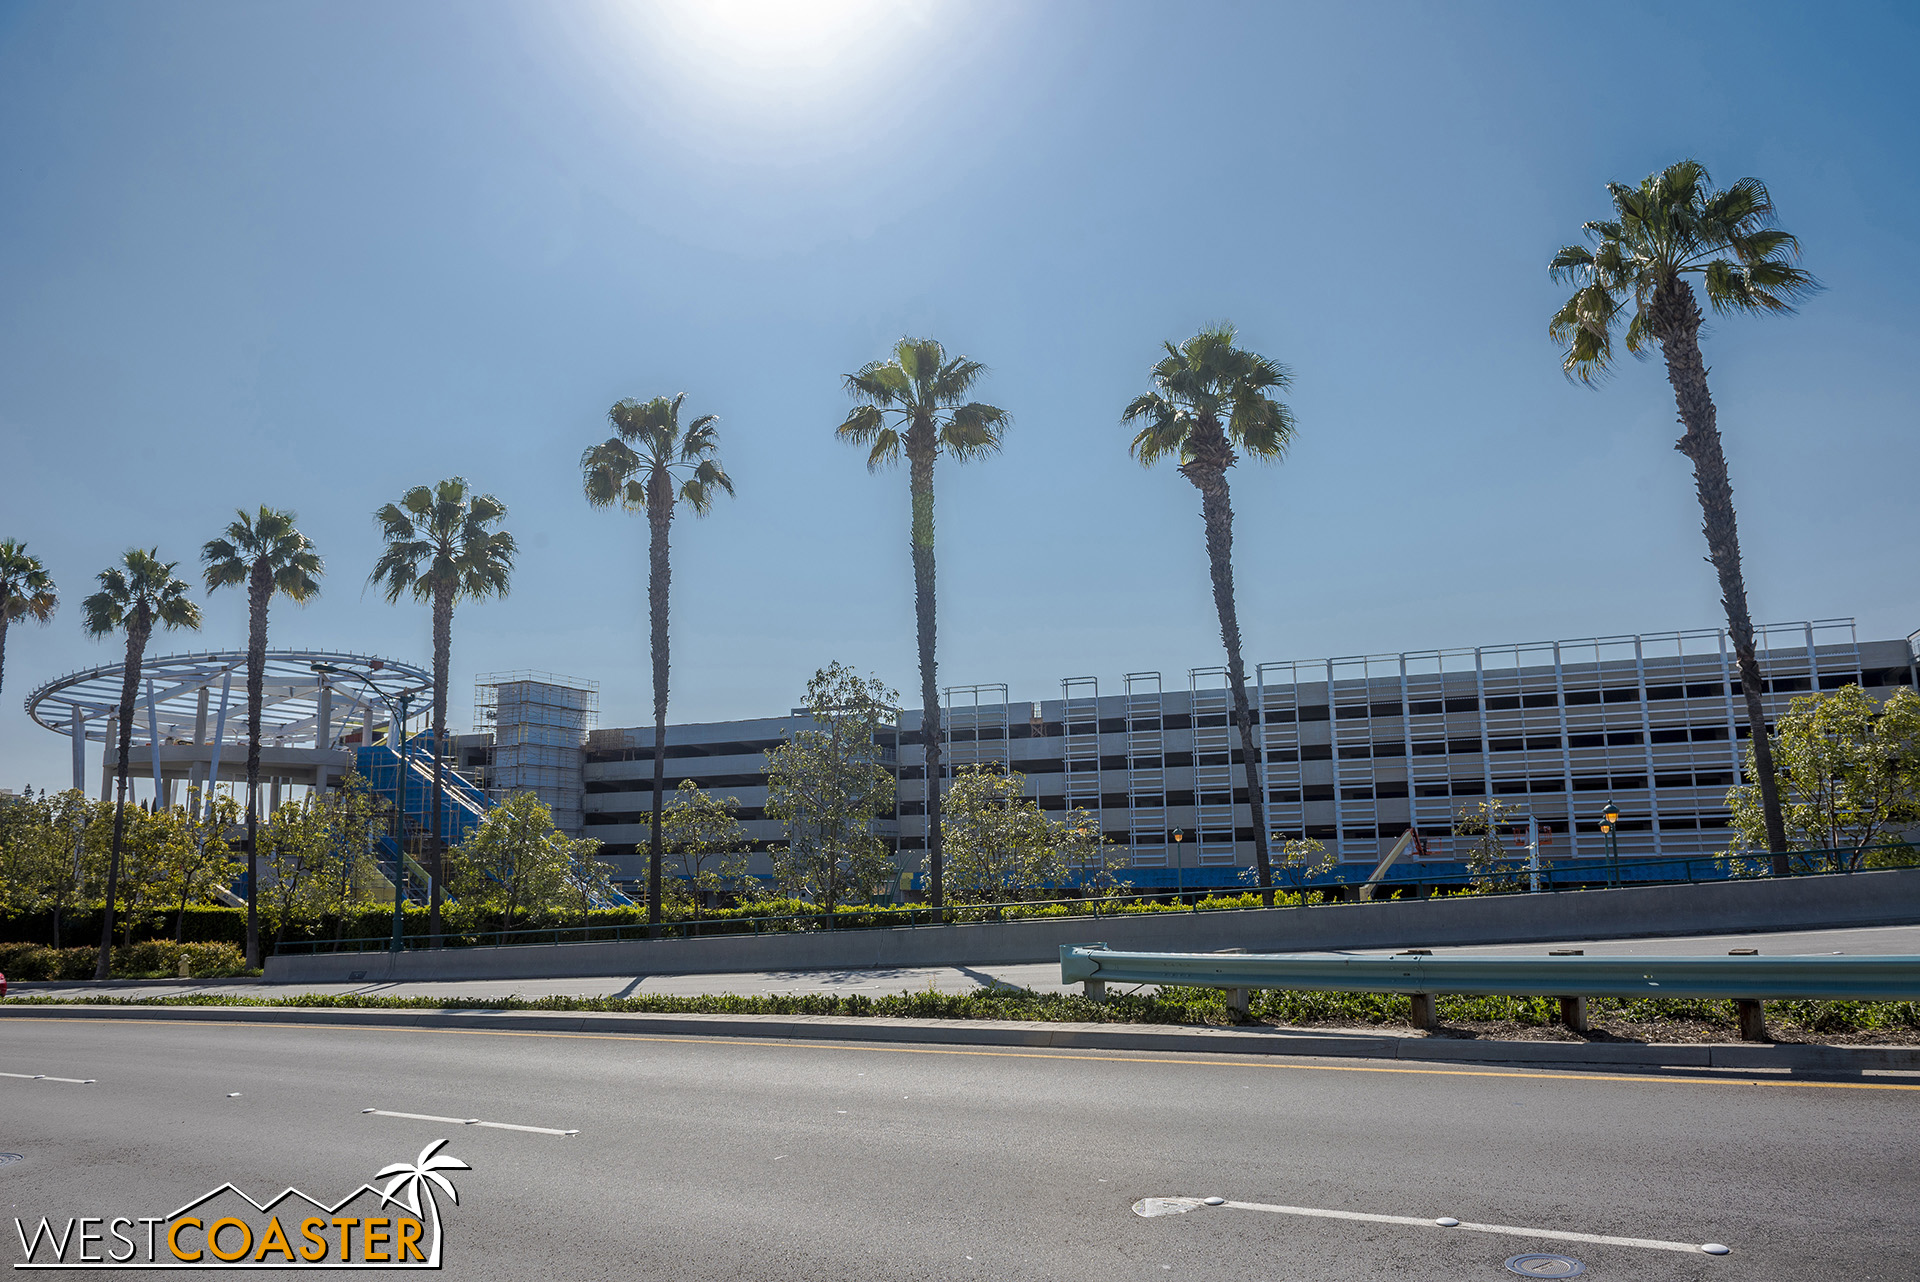  Here’s a view we haven’t really featured before… the parking structure expansion, as viewed from Disneyland Drive. 